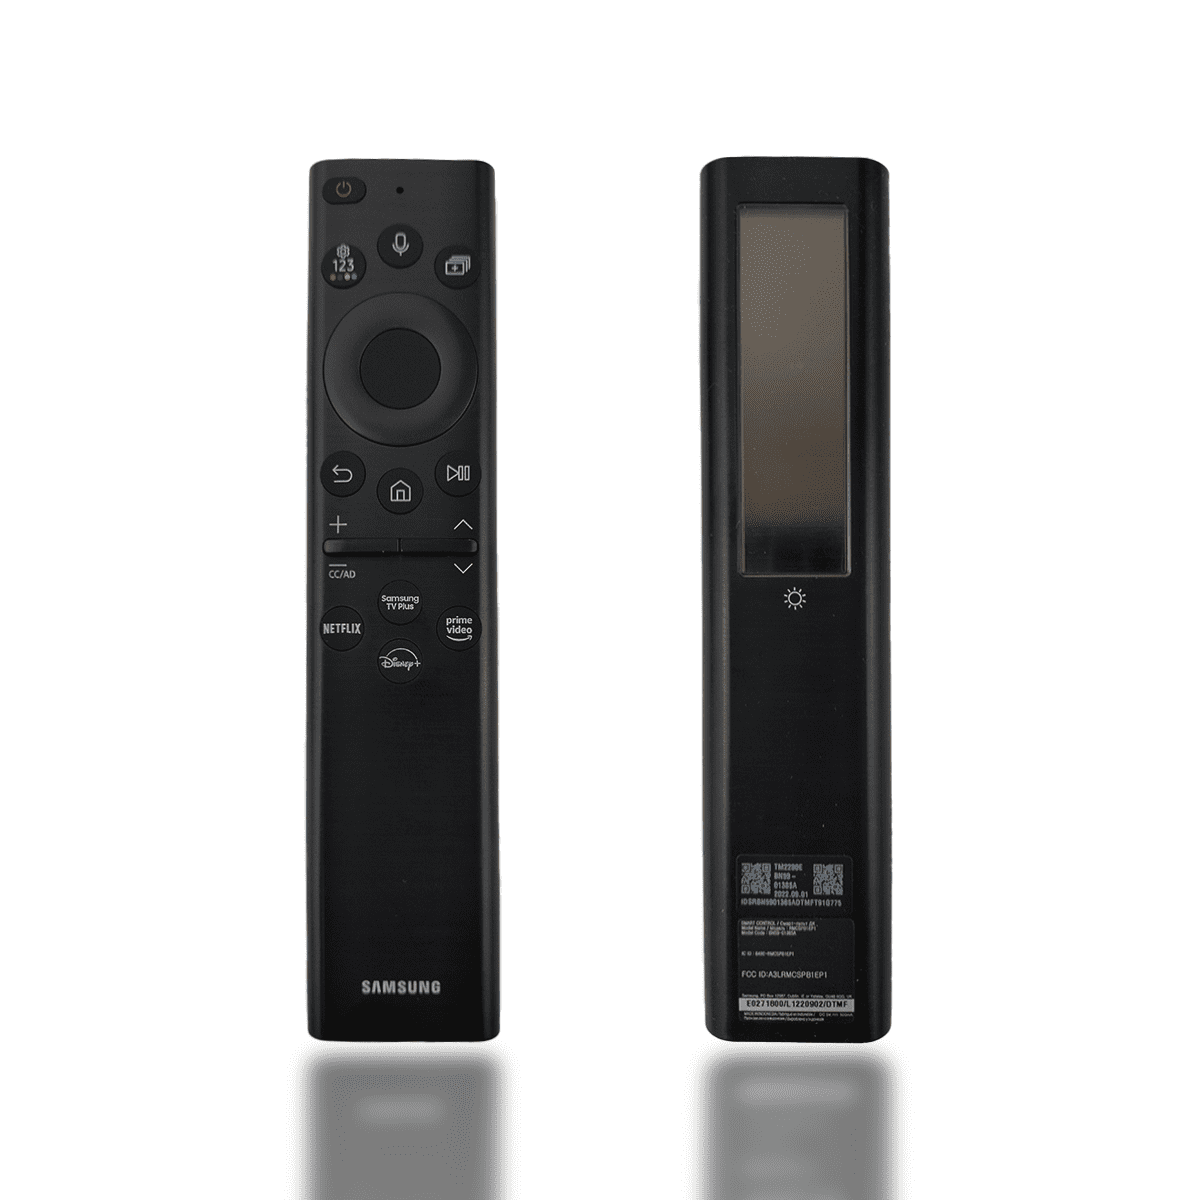 Ceybo Replacement Voice Remote Control for Samsung Smart TV Includes  Netflix, Prime Video and Samsung Internet Shortcut Buttons (BN59-01354A)